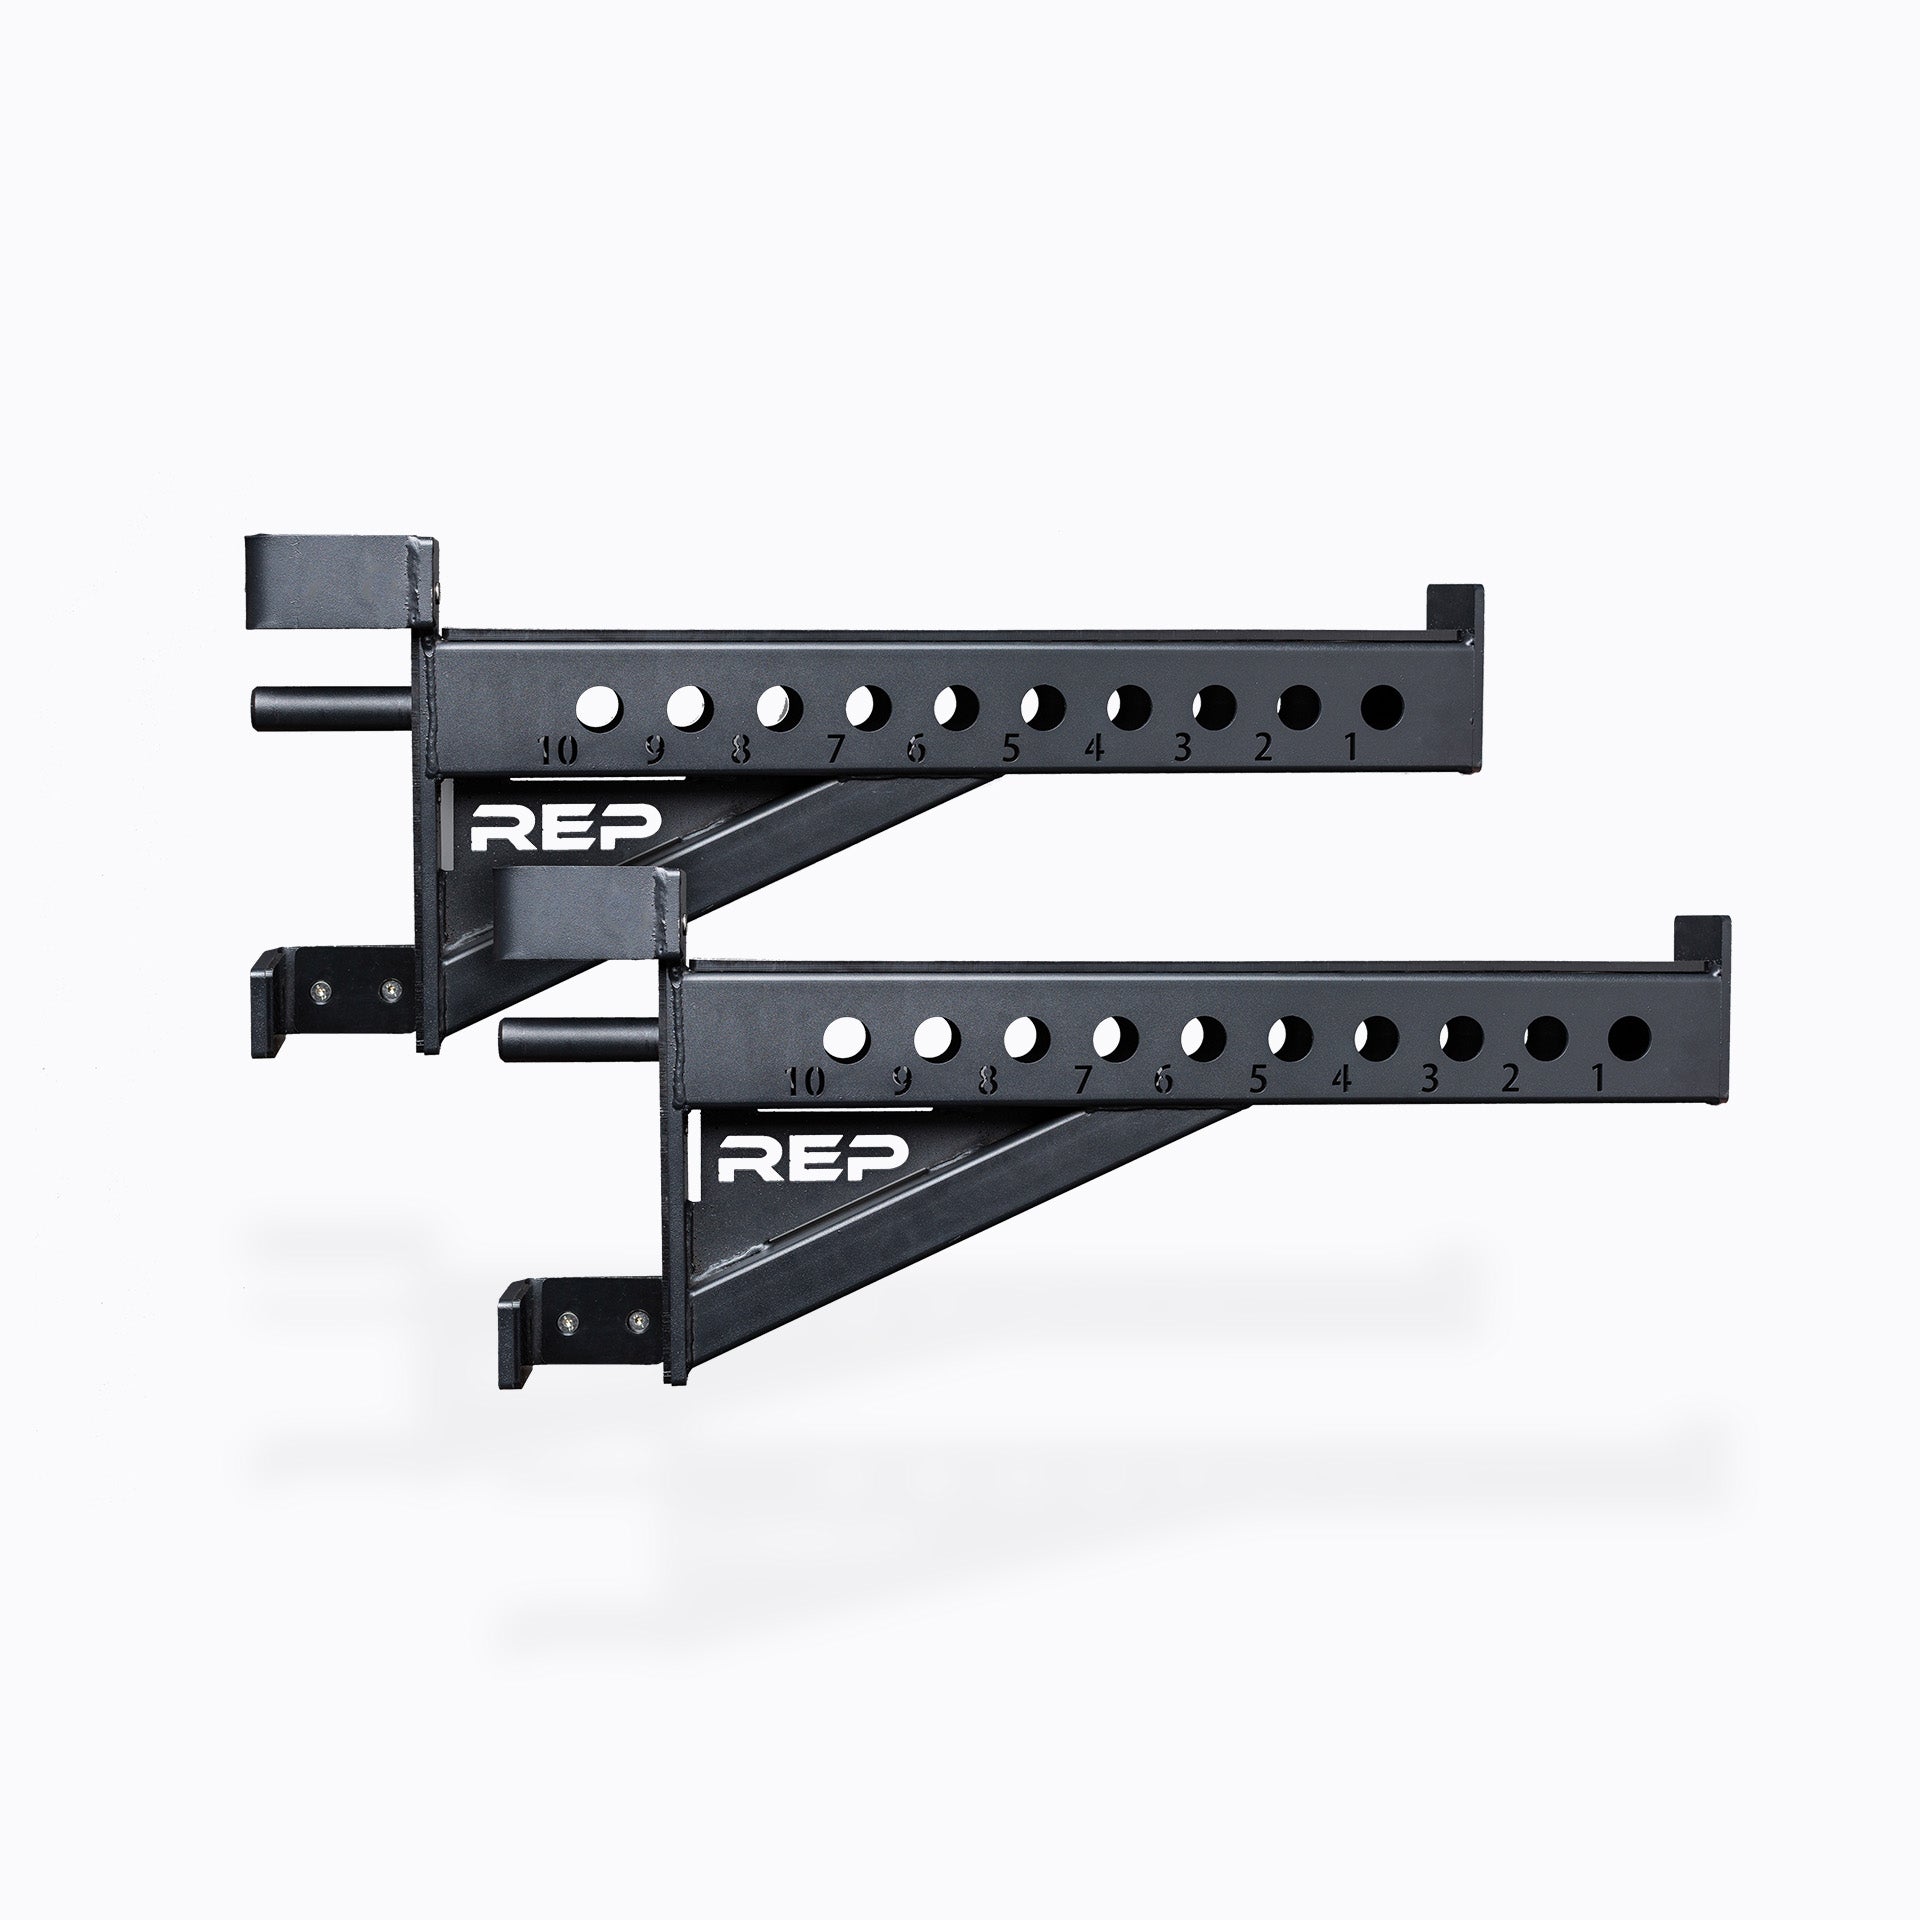 Additional Rack Attachments Guide